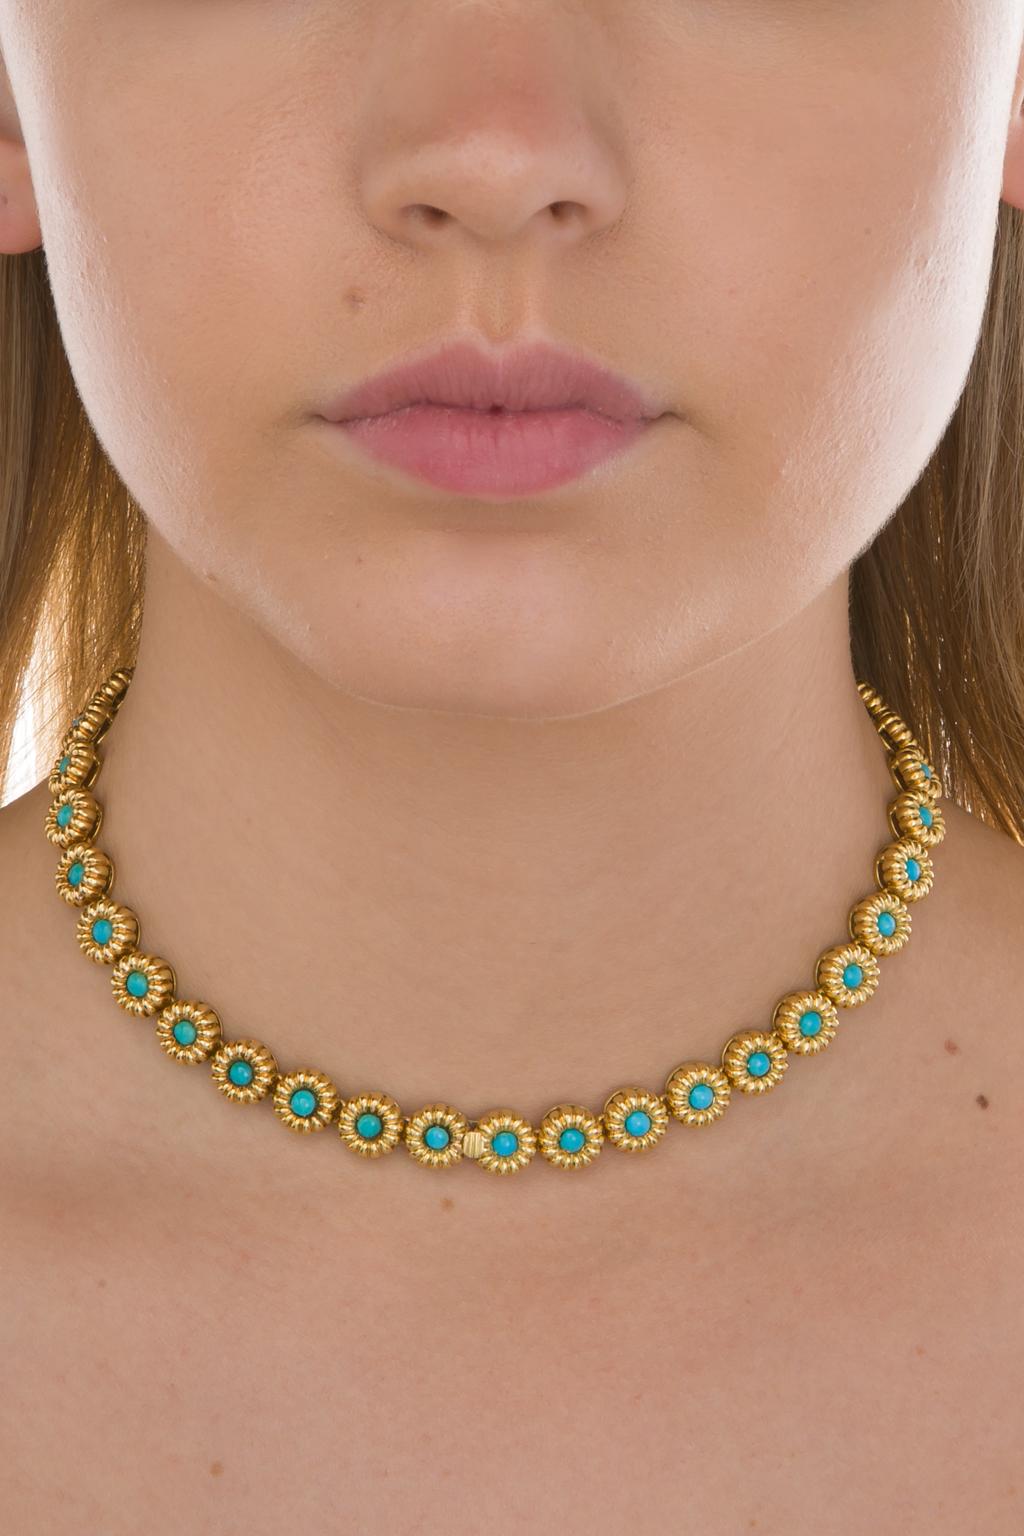 18 Karat Yellow Gold Turquoise Bracelets or Choker Necklace For Sale 1